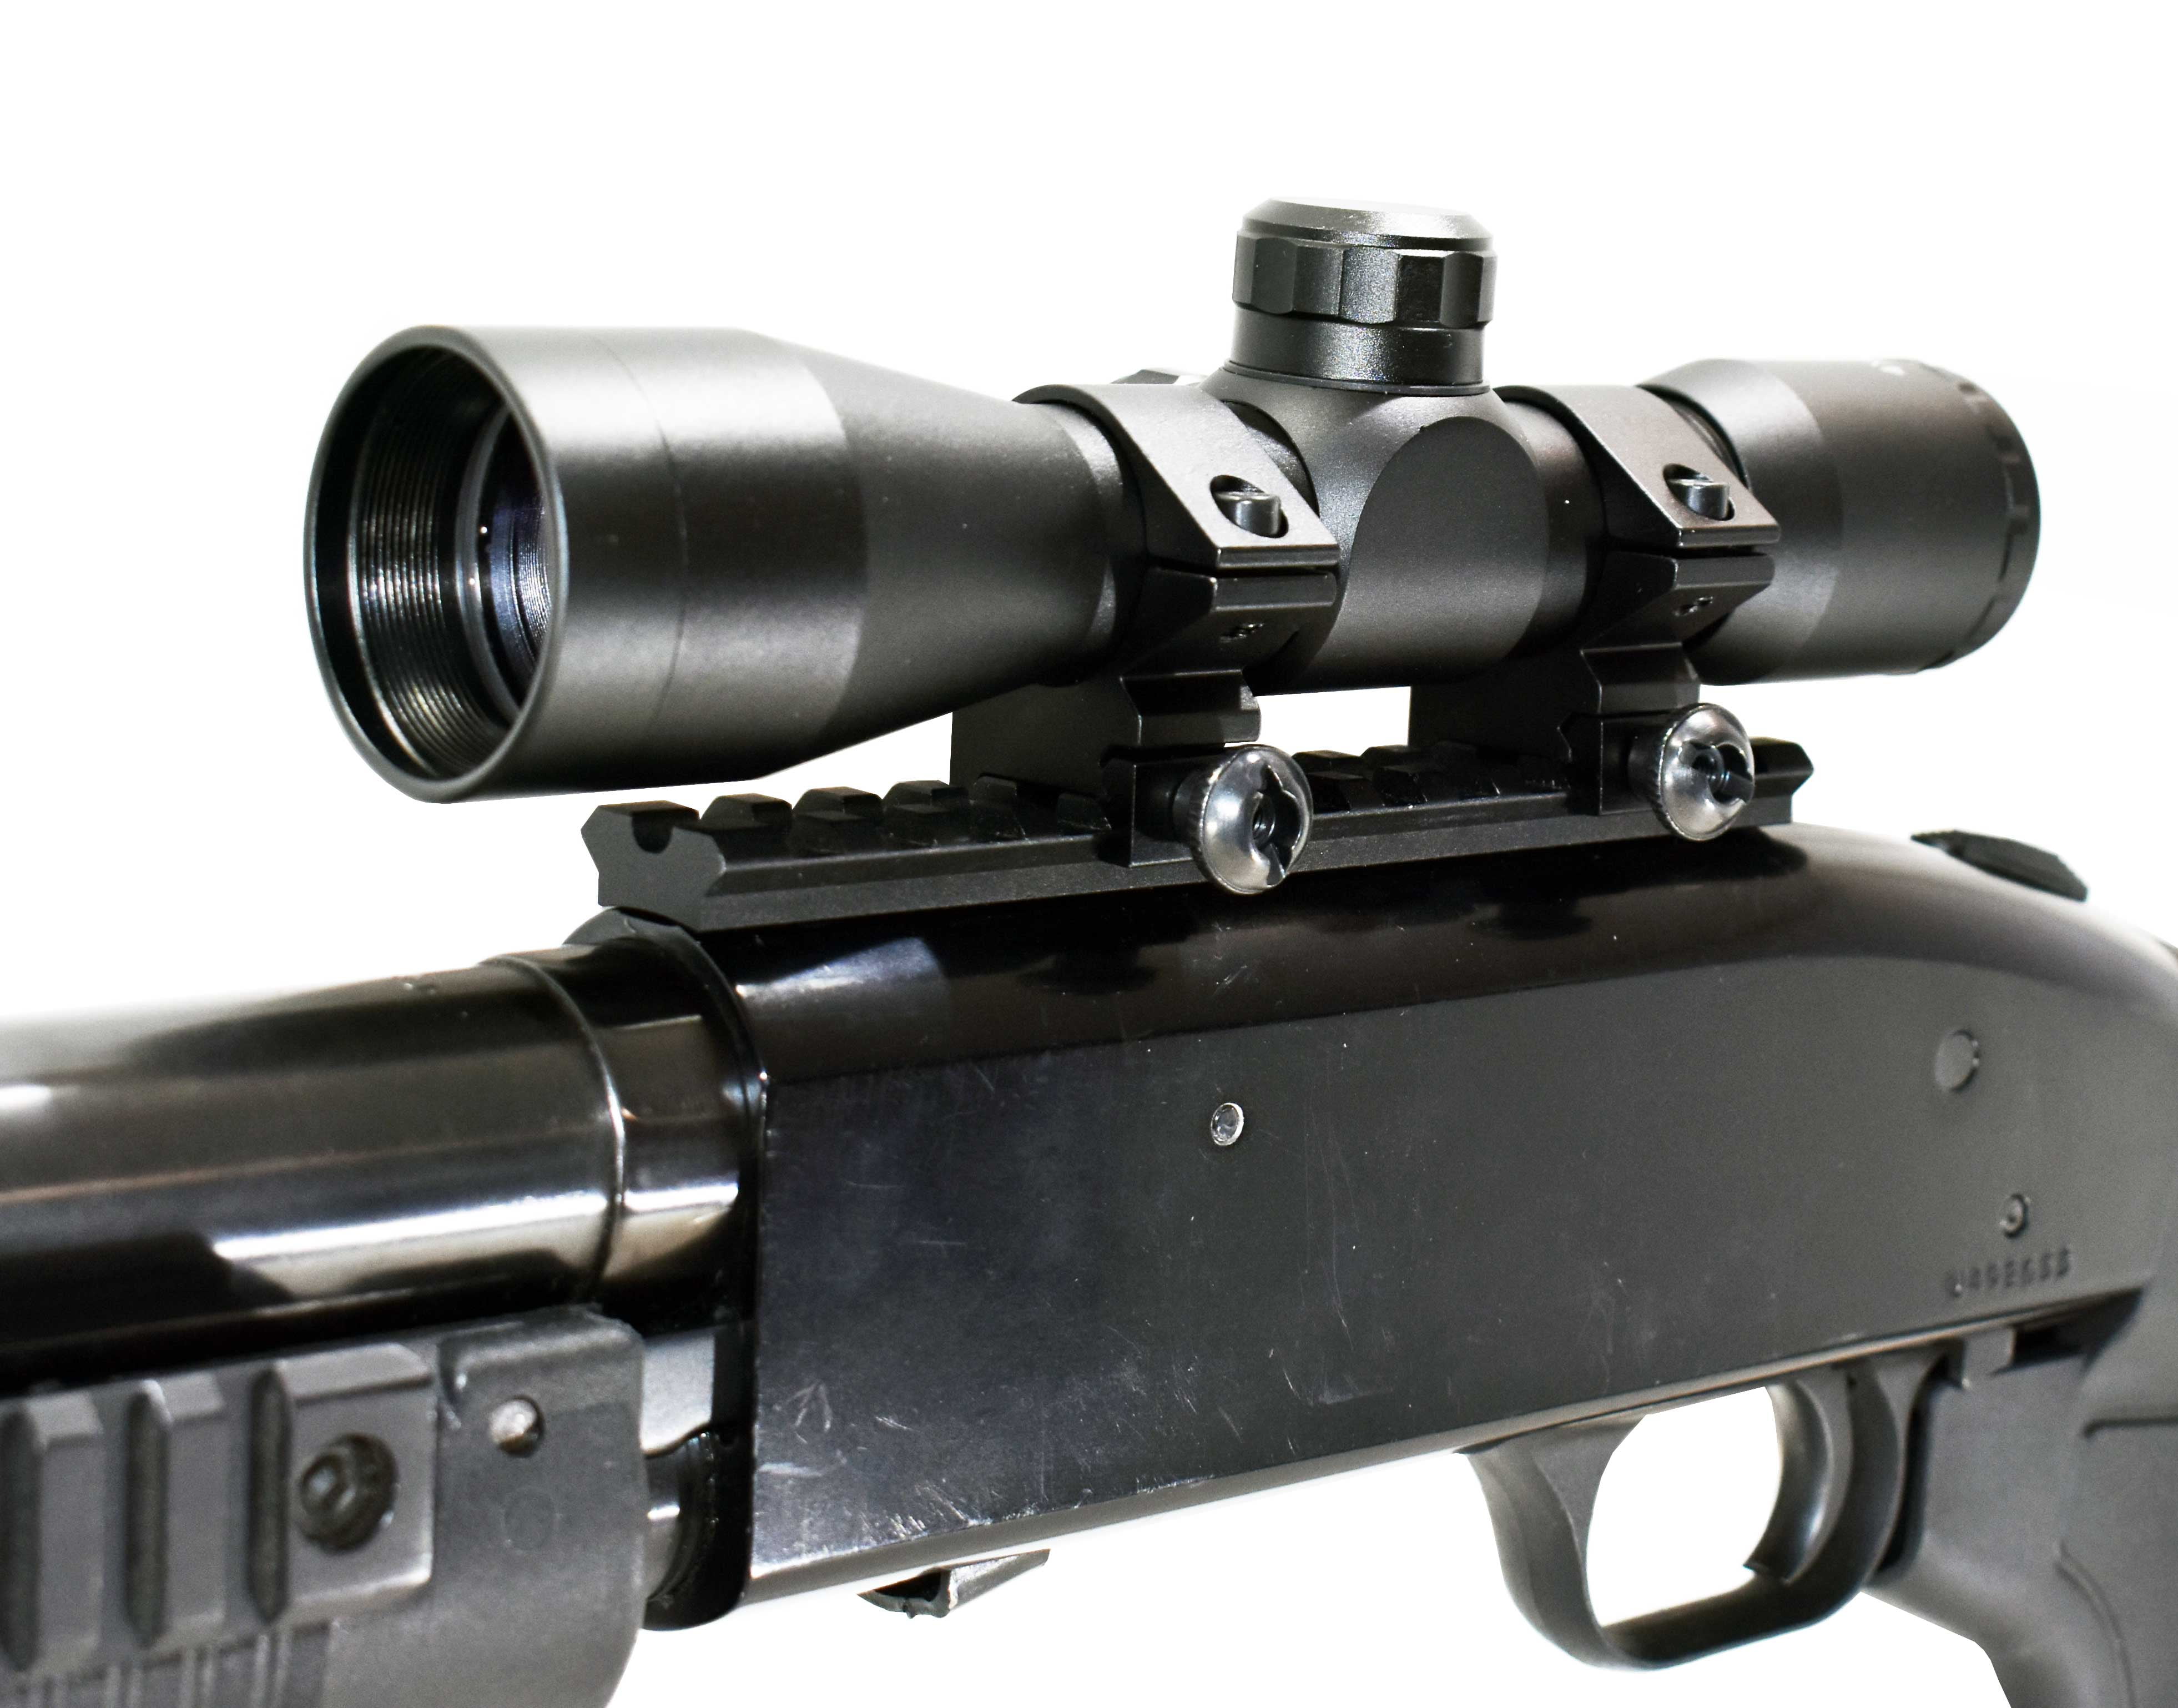 New 4 x 32 Telescopic Sight Scope with 20mm Rail Mounts For Air Rifle Gun 